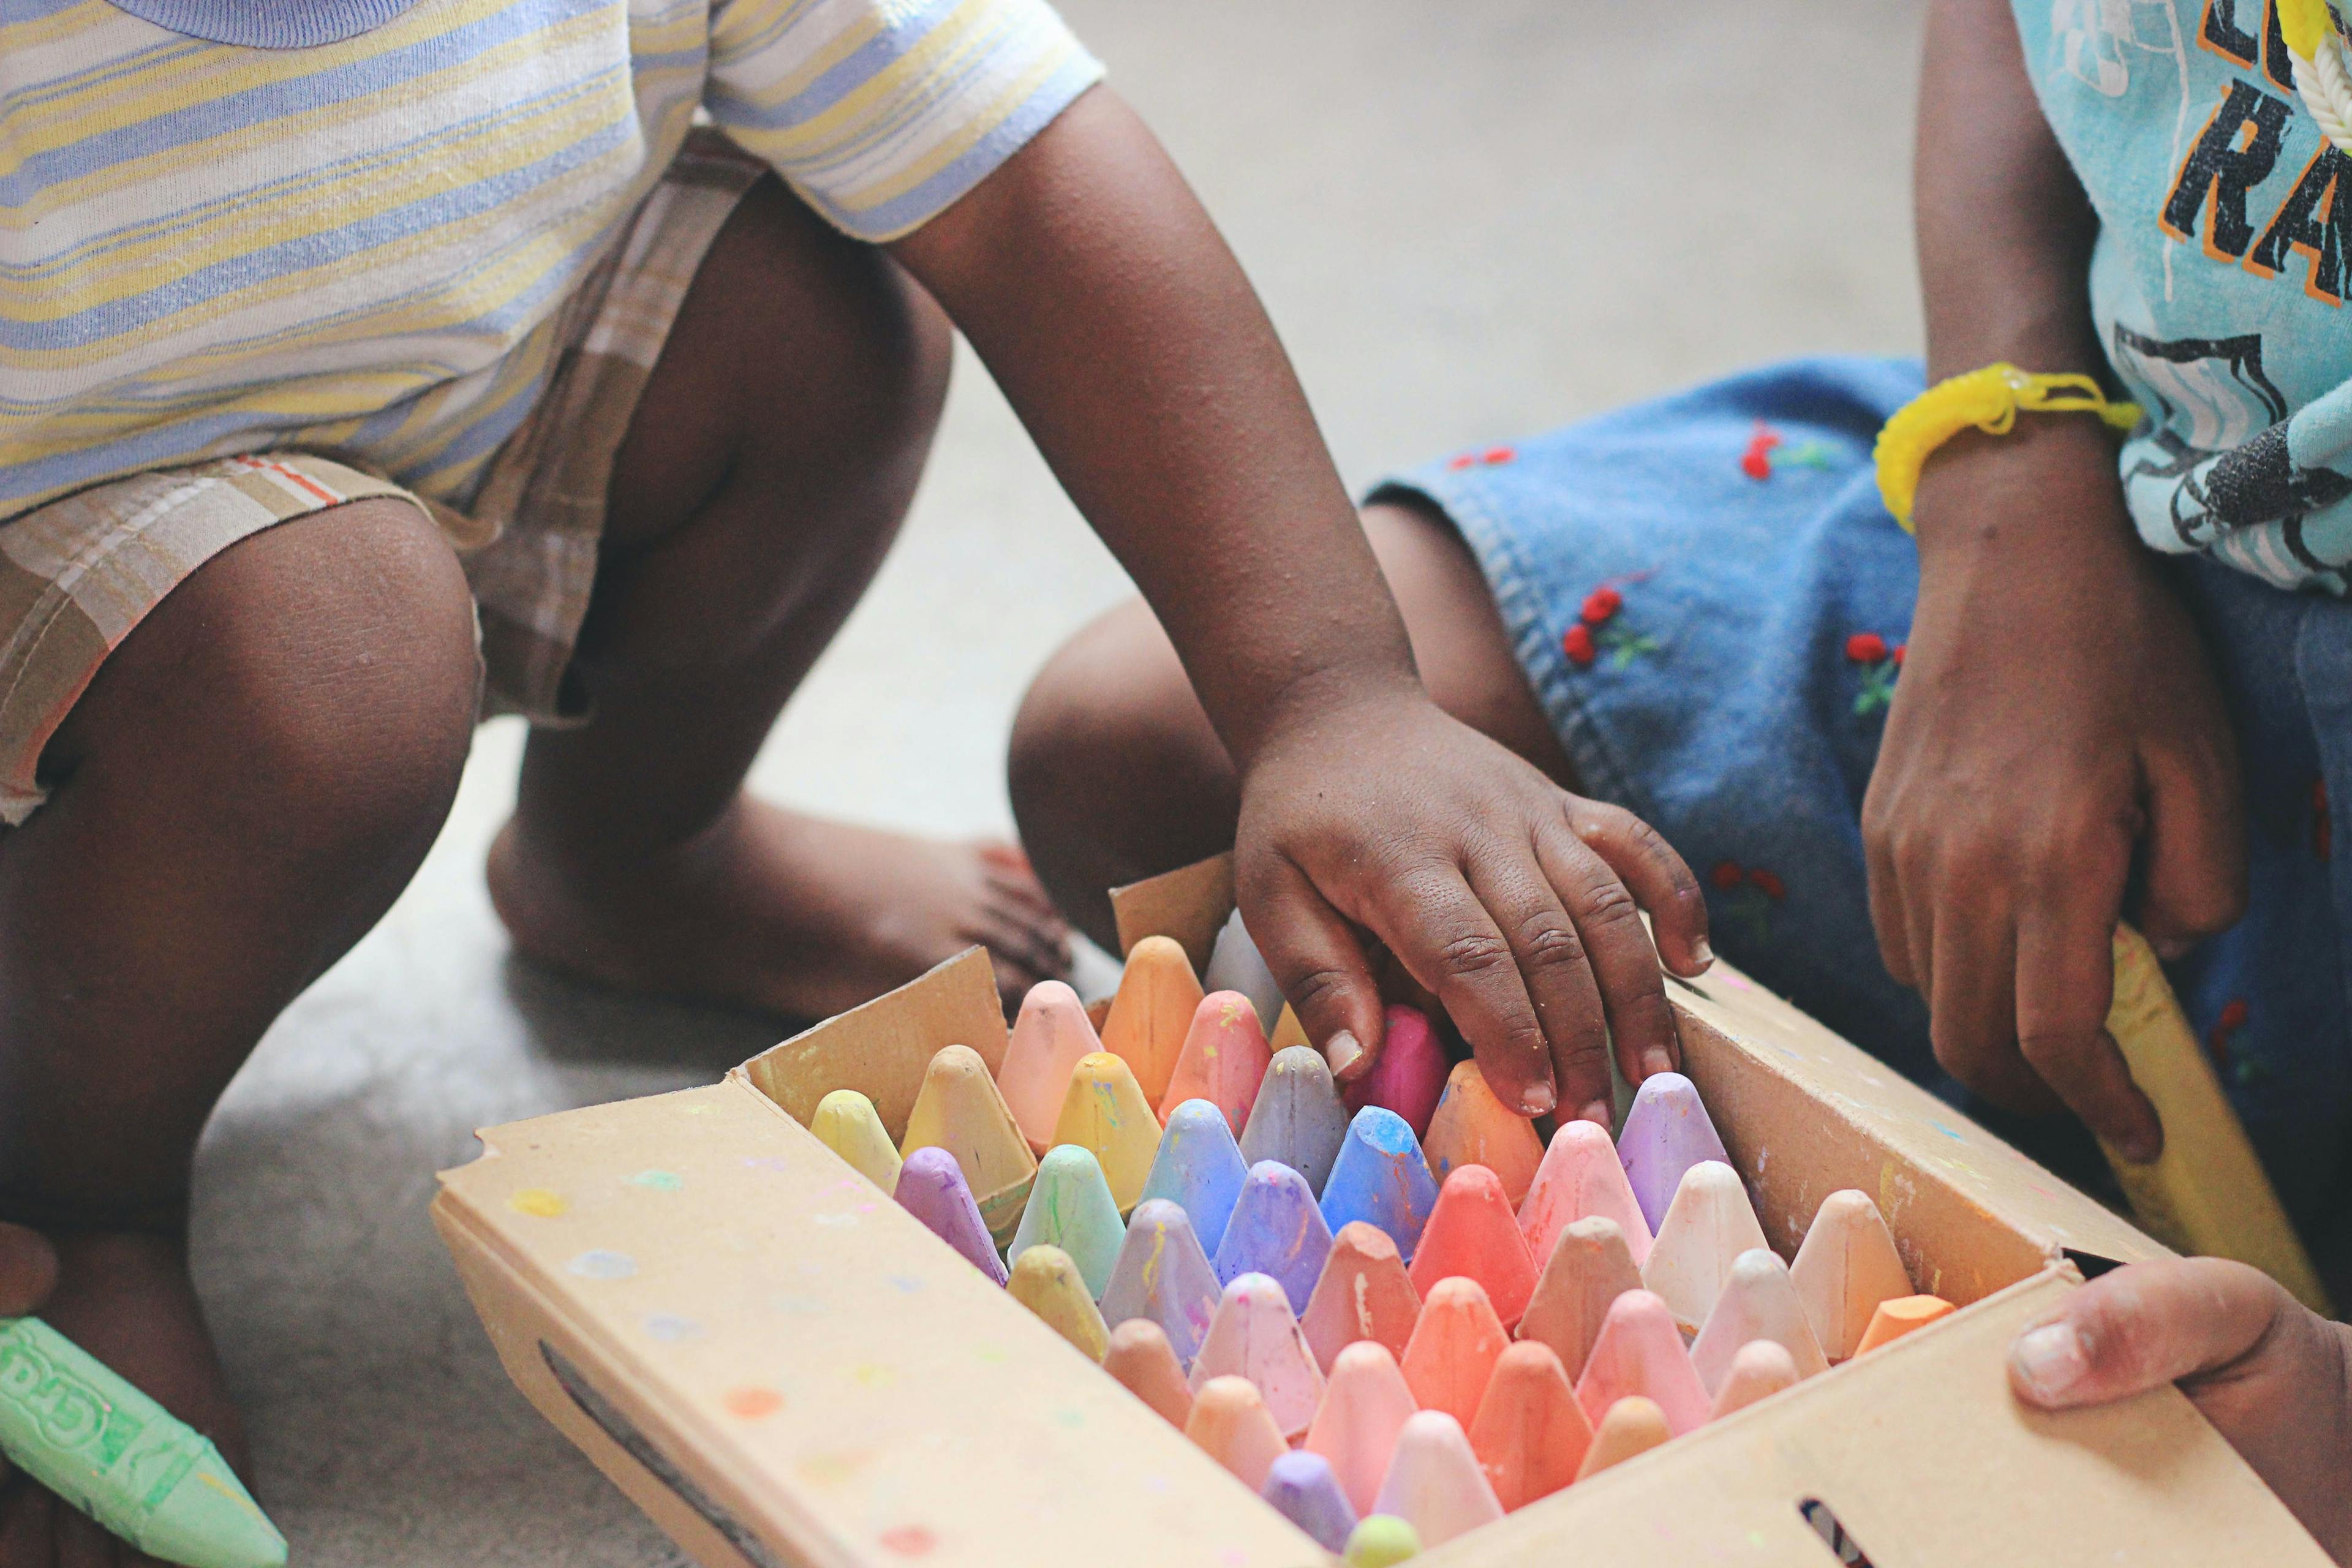 Scandal rocks Luxembourgish Montessori crèche chain: poor conditions for workers affect children